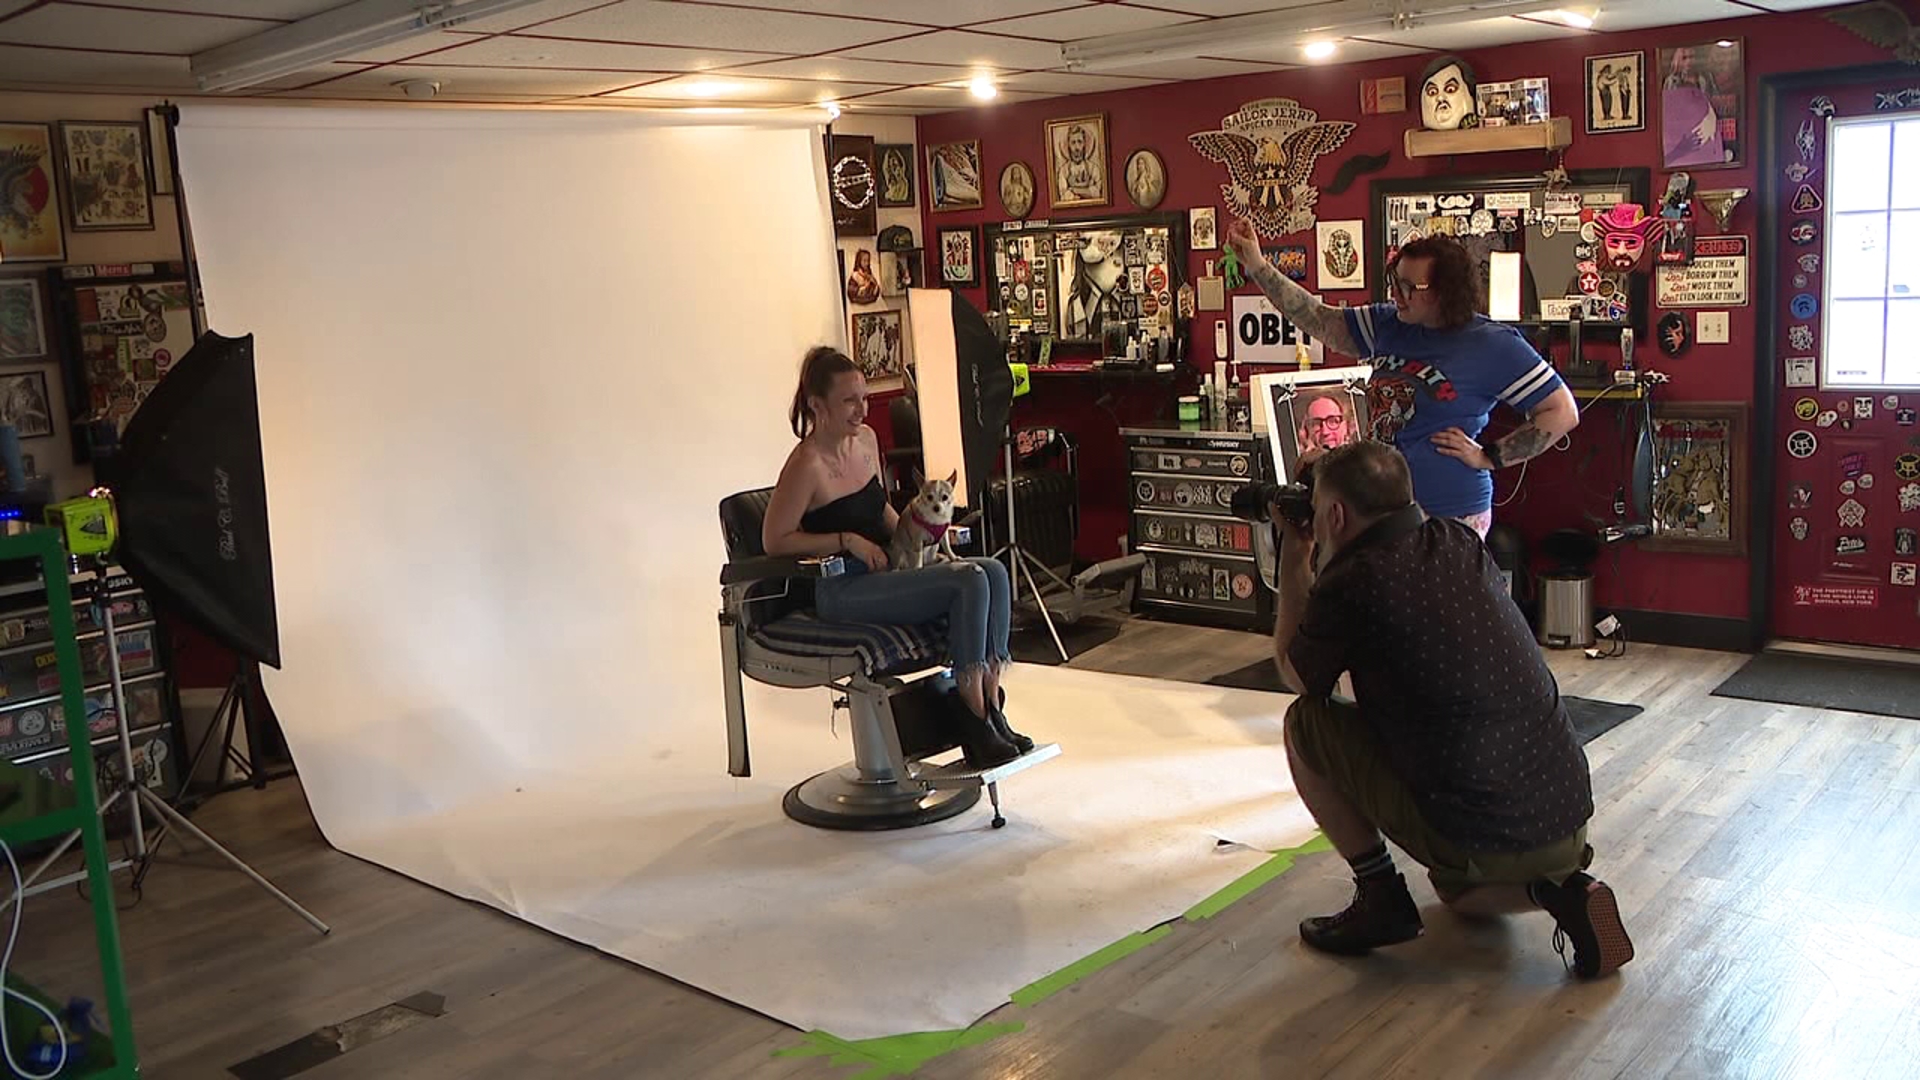 Loyalty Barbershop in Archbald held a pet portrait event Sunday in memory of its owner, Brian Nardella.